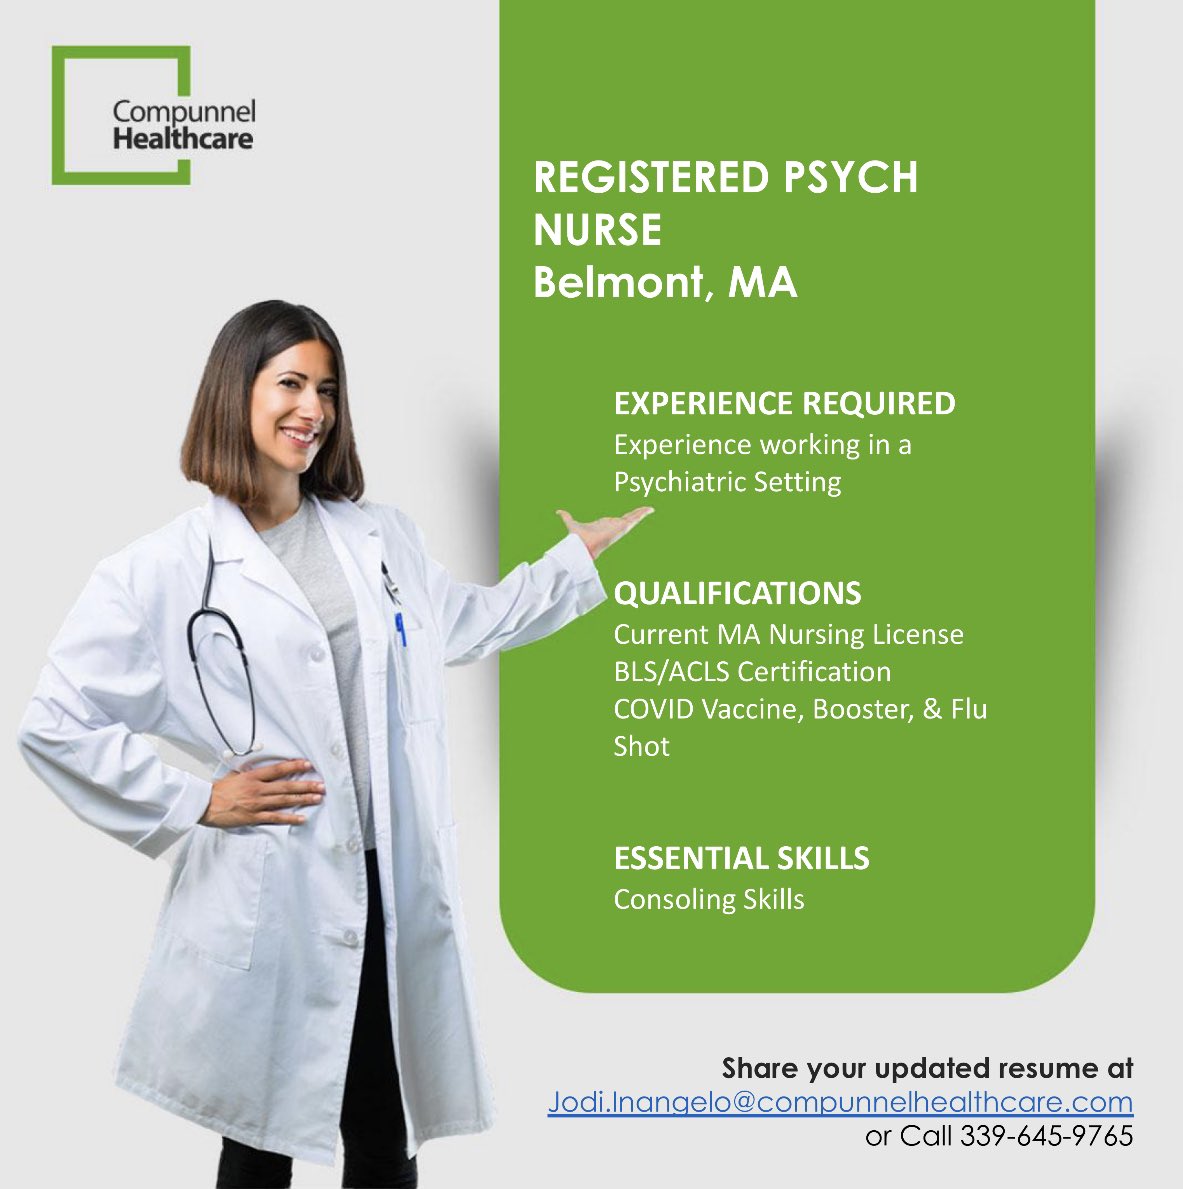 Registered Psych Nurse Position Available* in Belmont, MA ⚕️ 

*Contract Job

Mon - Fri & Every Other Weekend 11pm - 7 am

Contact Jodi Inangelo at 339-645-9765 or Jodi.inangelo@compunnelhealthcare.com

#rn #registerednurse #rnjobs #rncareers #registerednursejobs #nursingjobs